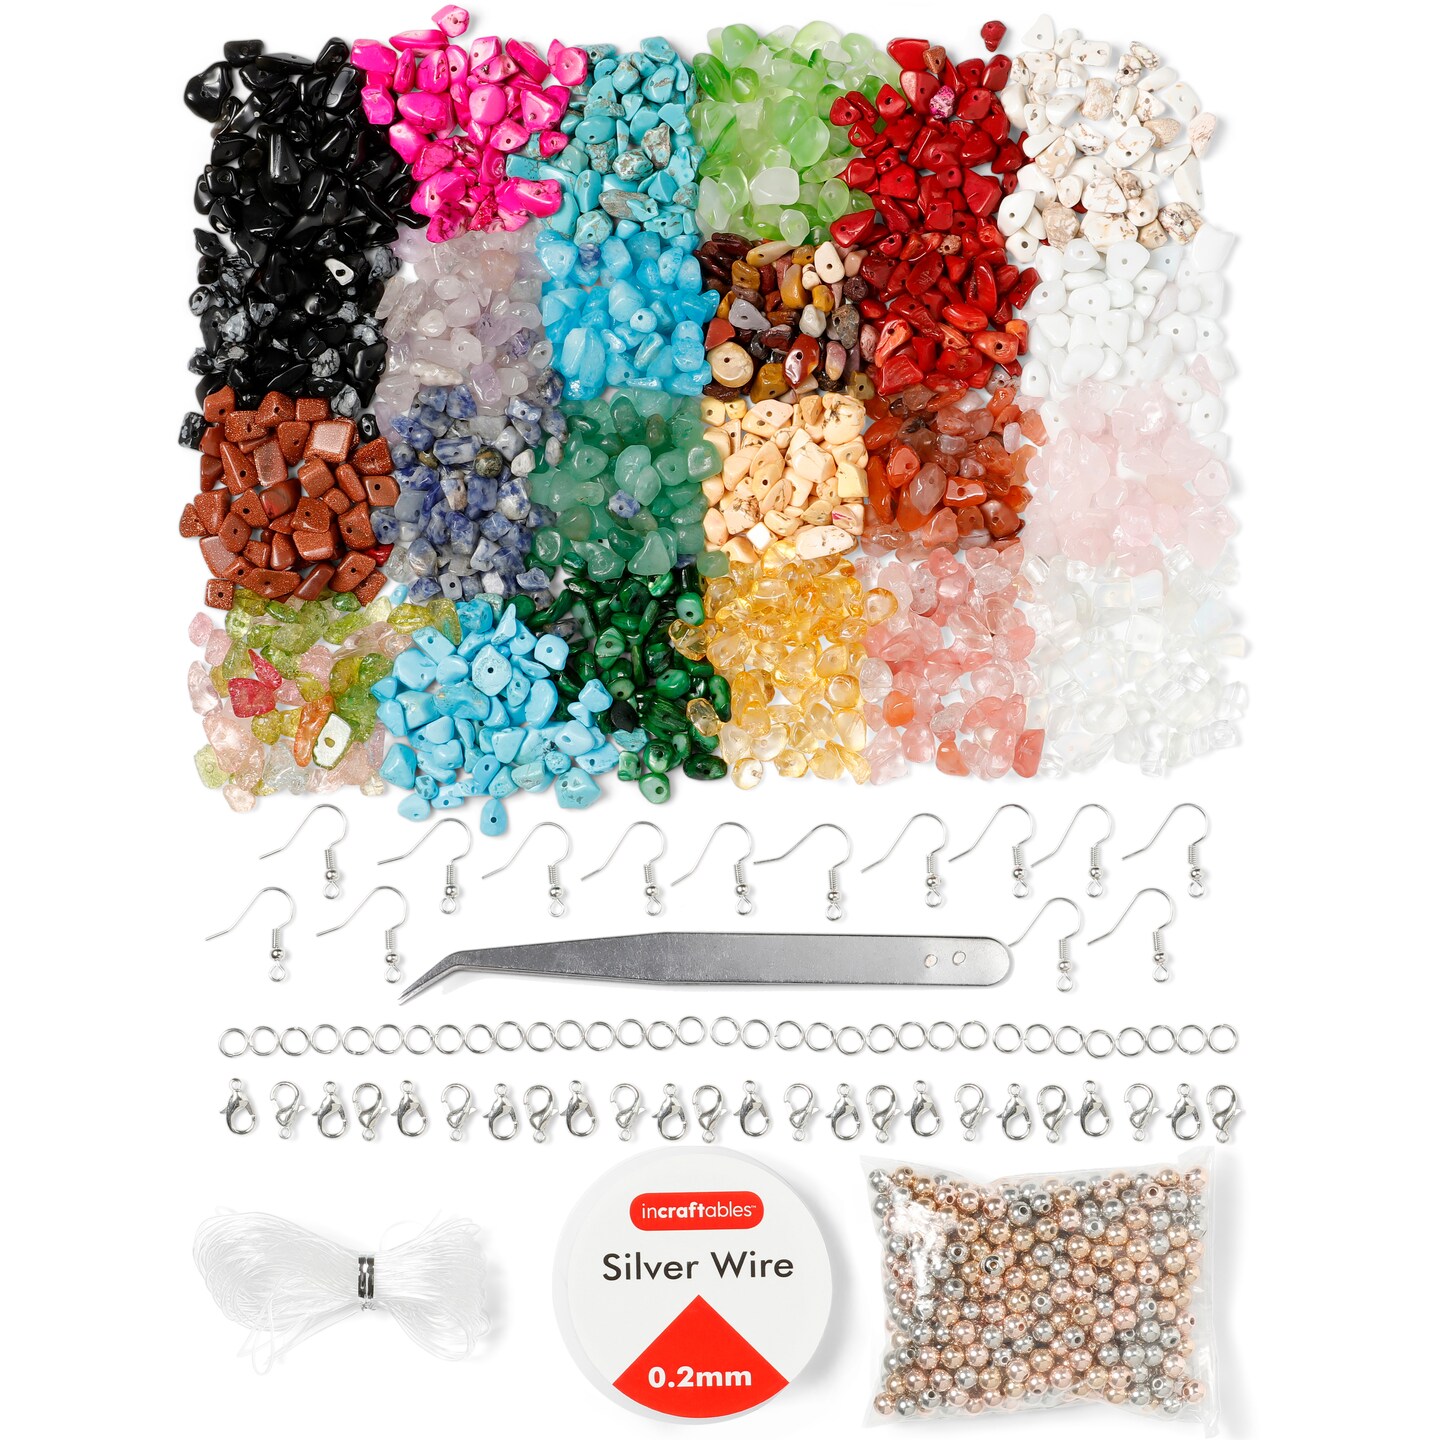 Incraftables 1000pcs Crystal Gemstone Beads for Jewelry Making (24 Colors). Best Natural Stone Chips Kit with Spacer Bead, Silver Wire, Elastic String, Earrings &#x26; Organizer for DIY Crafts &#x26; Bracelet